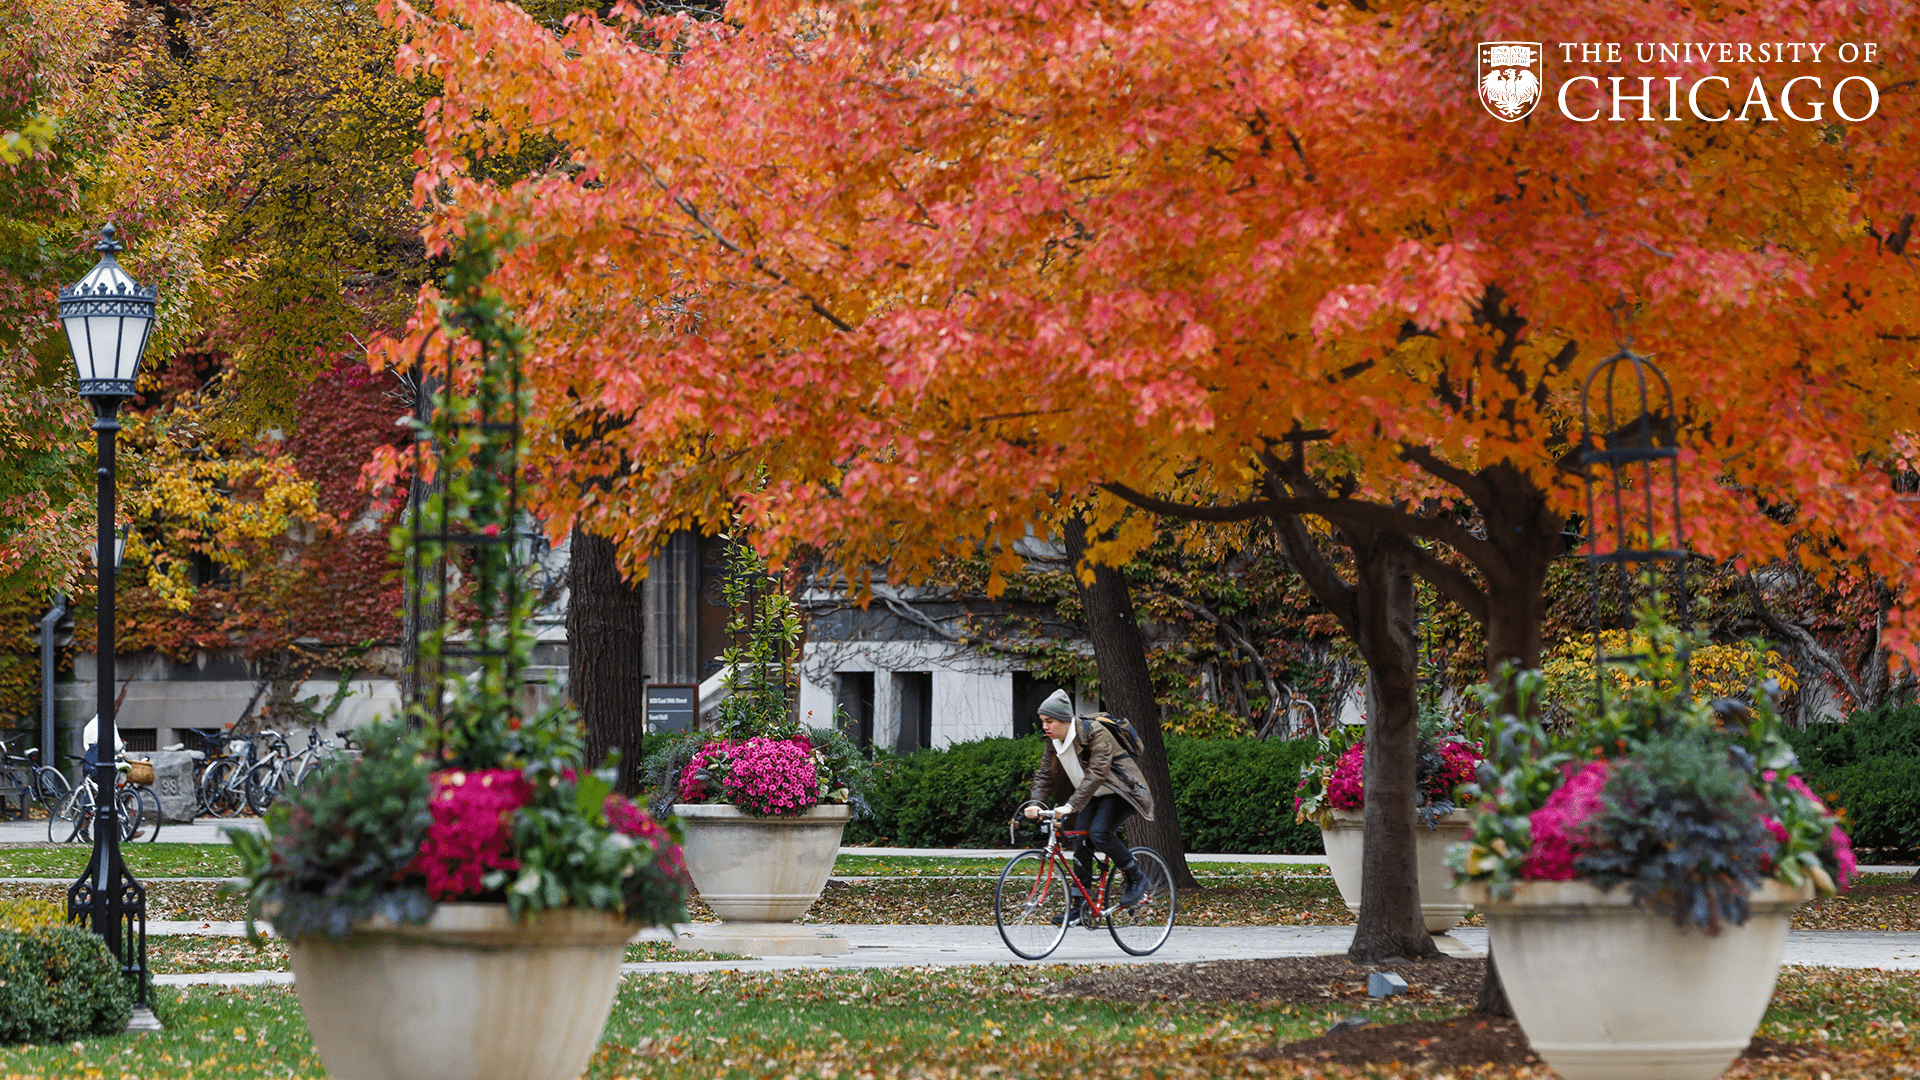 Person biking through the quad with trees with red leaves in the foreground